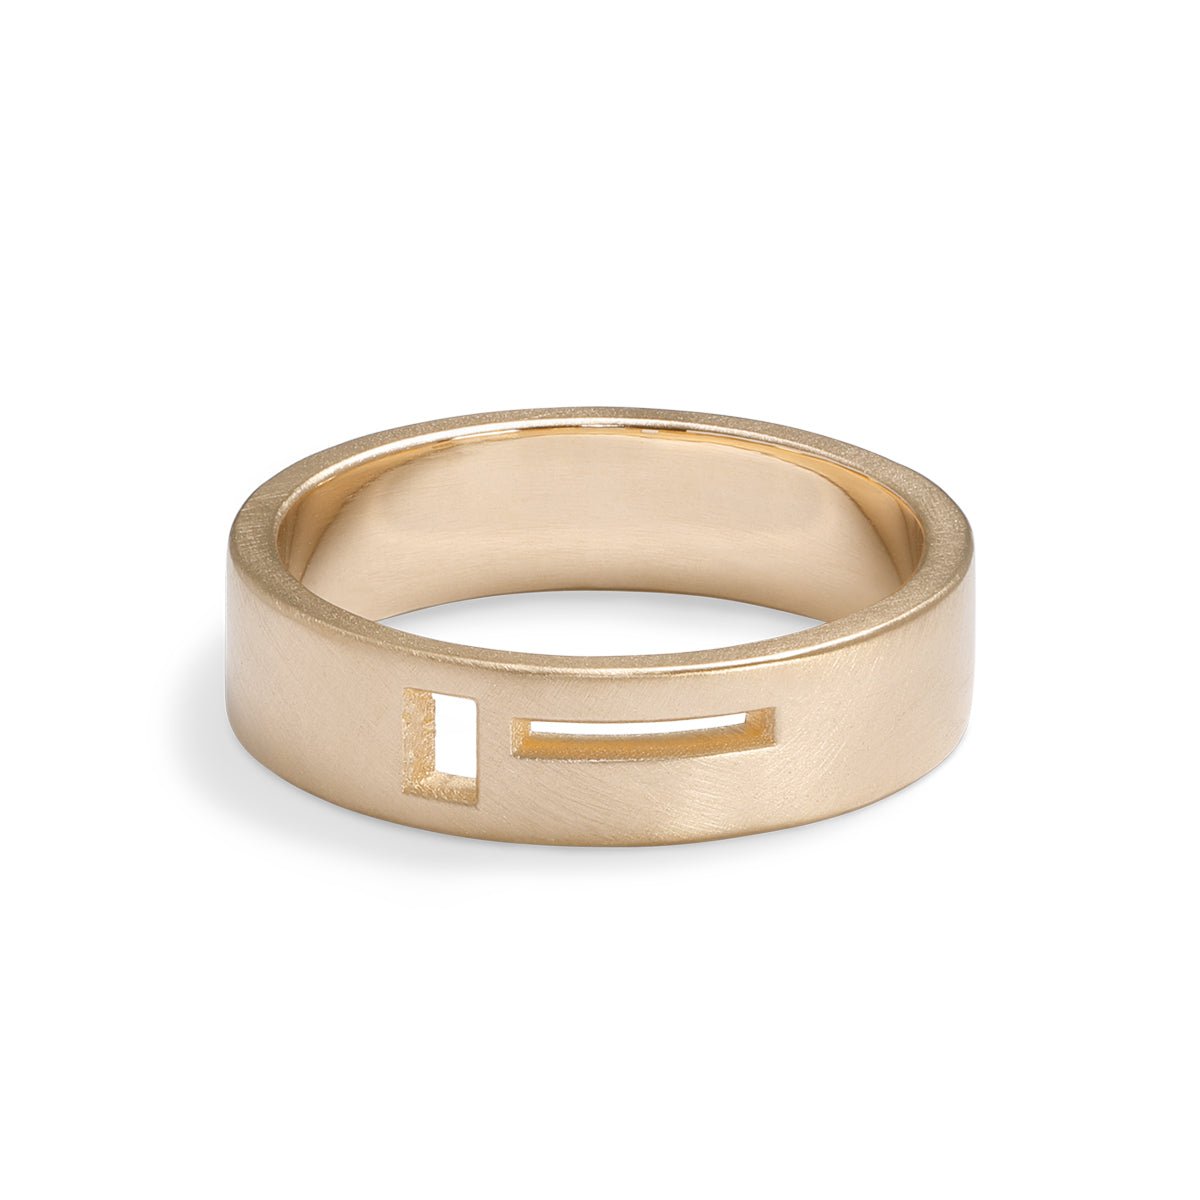 Wide band Sero ring. Features geometric cut-out band in 14K recycled gold. Designed and crafted in Portland, Oregon.